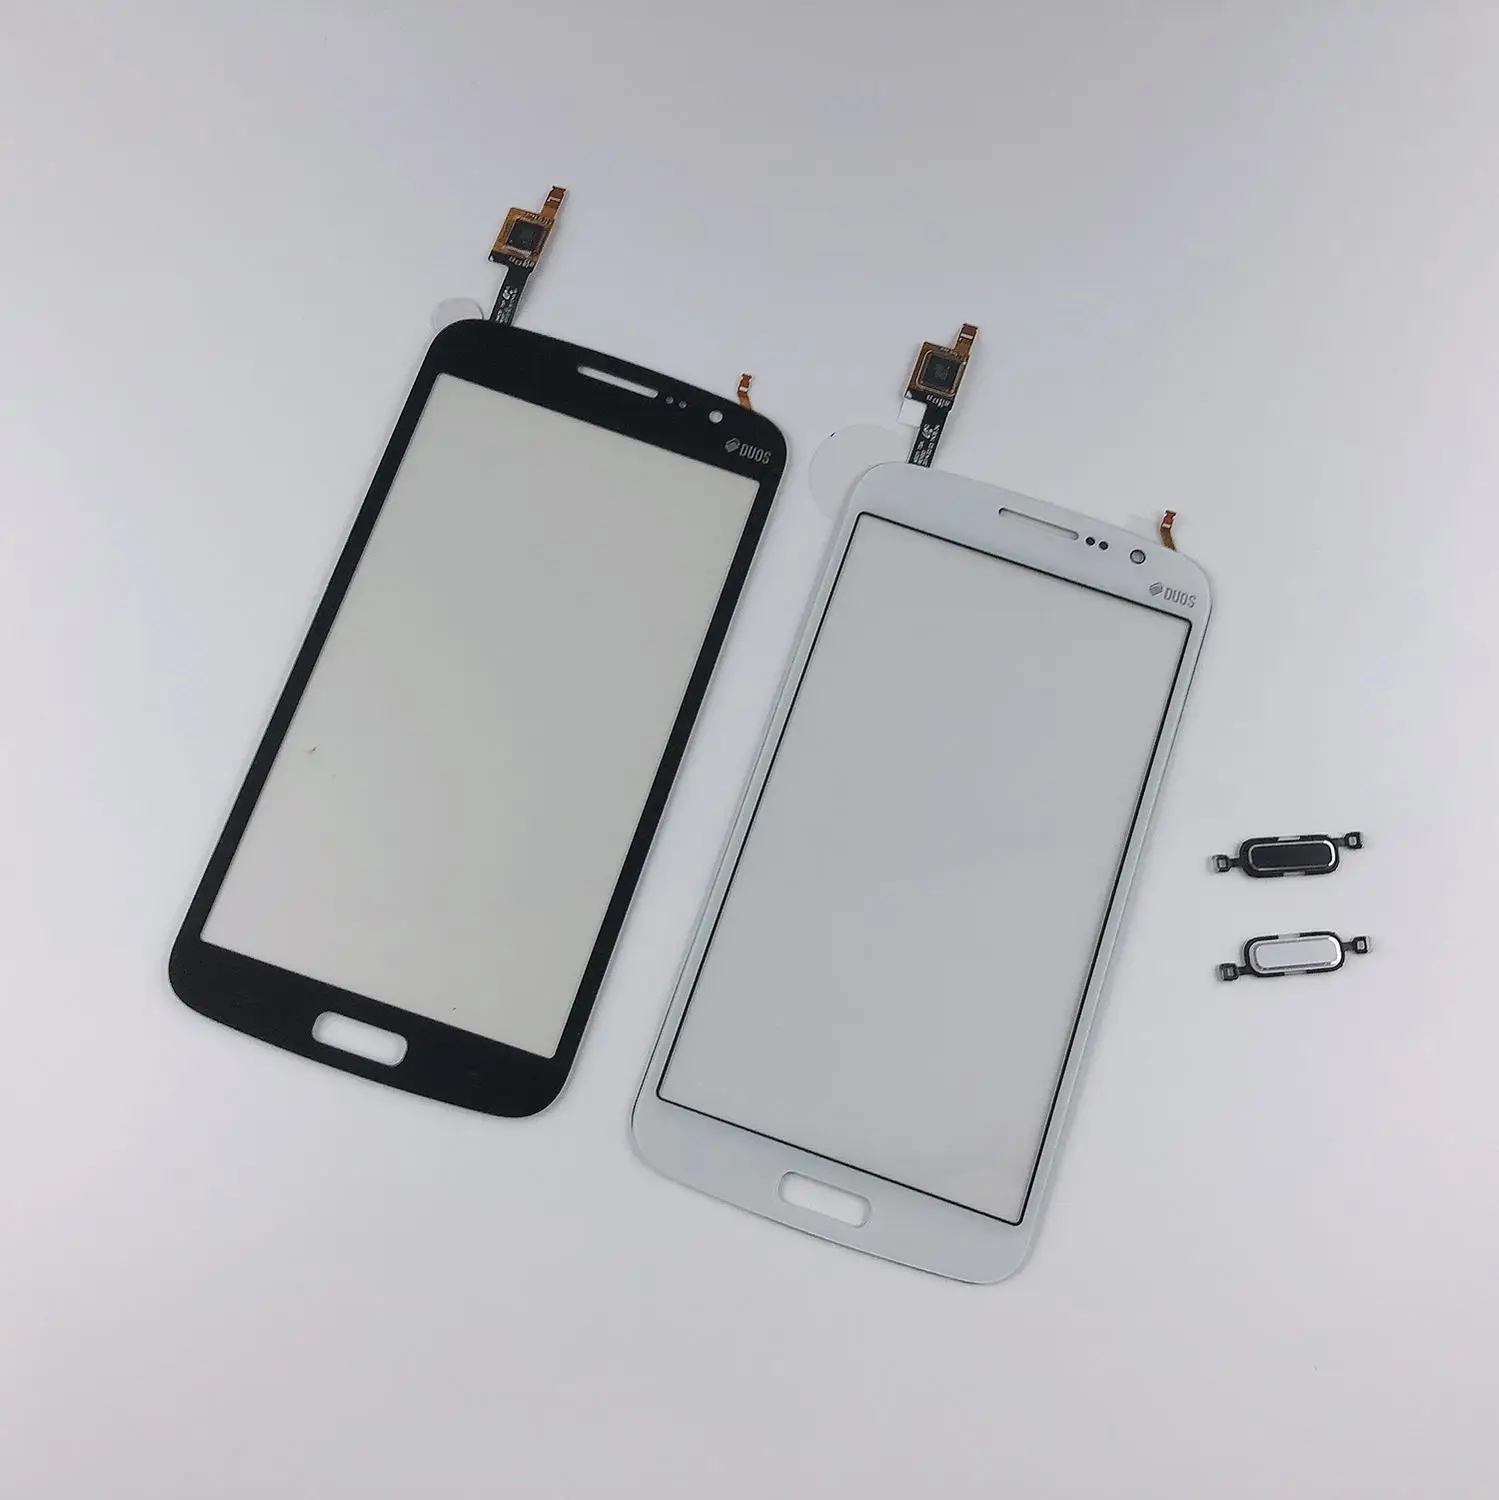 For Samsung Galaxy Grand 2 G7102 G7106 G7105 G7108 Touch Screen Digitizer Front Glass Panel+3M Tape+Home Button Return Keypad